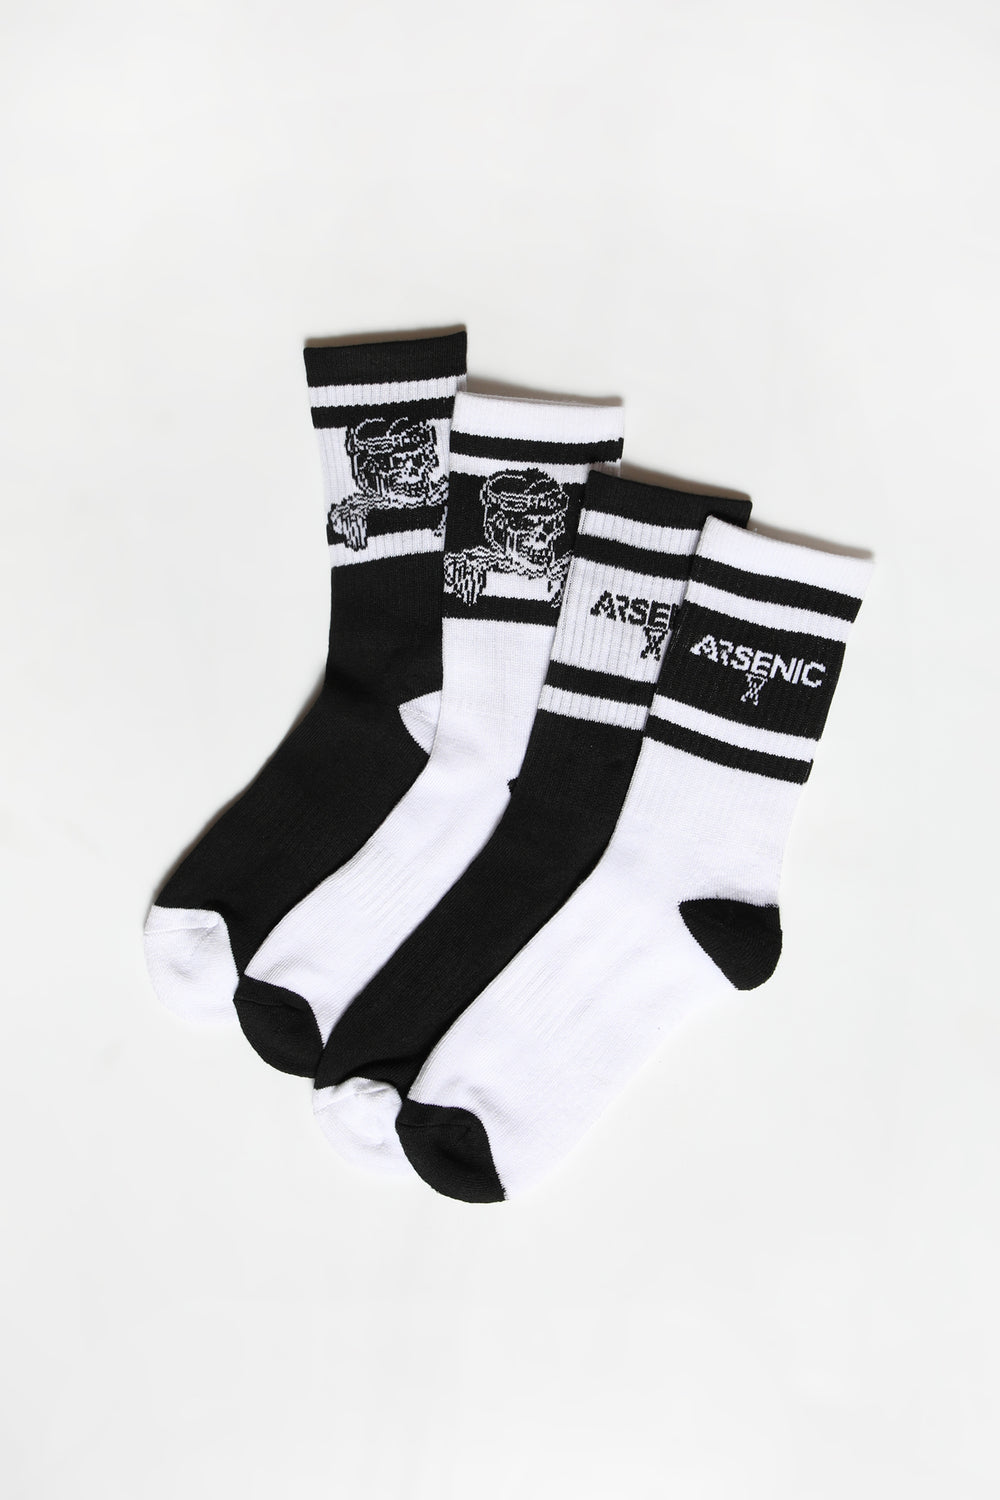 Arsenic Youth 4-Pack Athletic Crew Socks Black with White